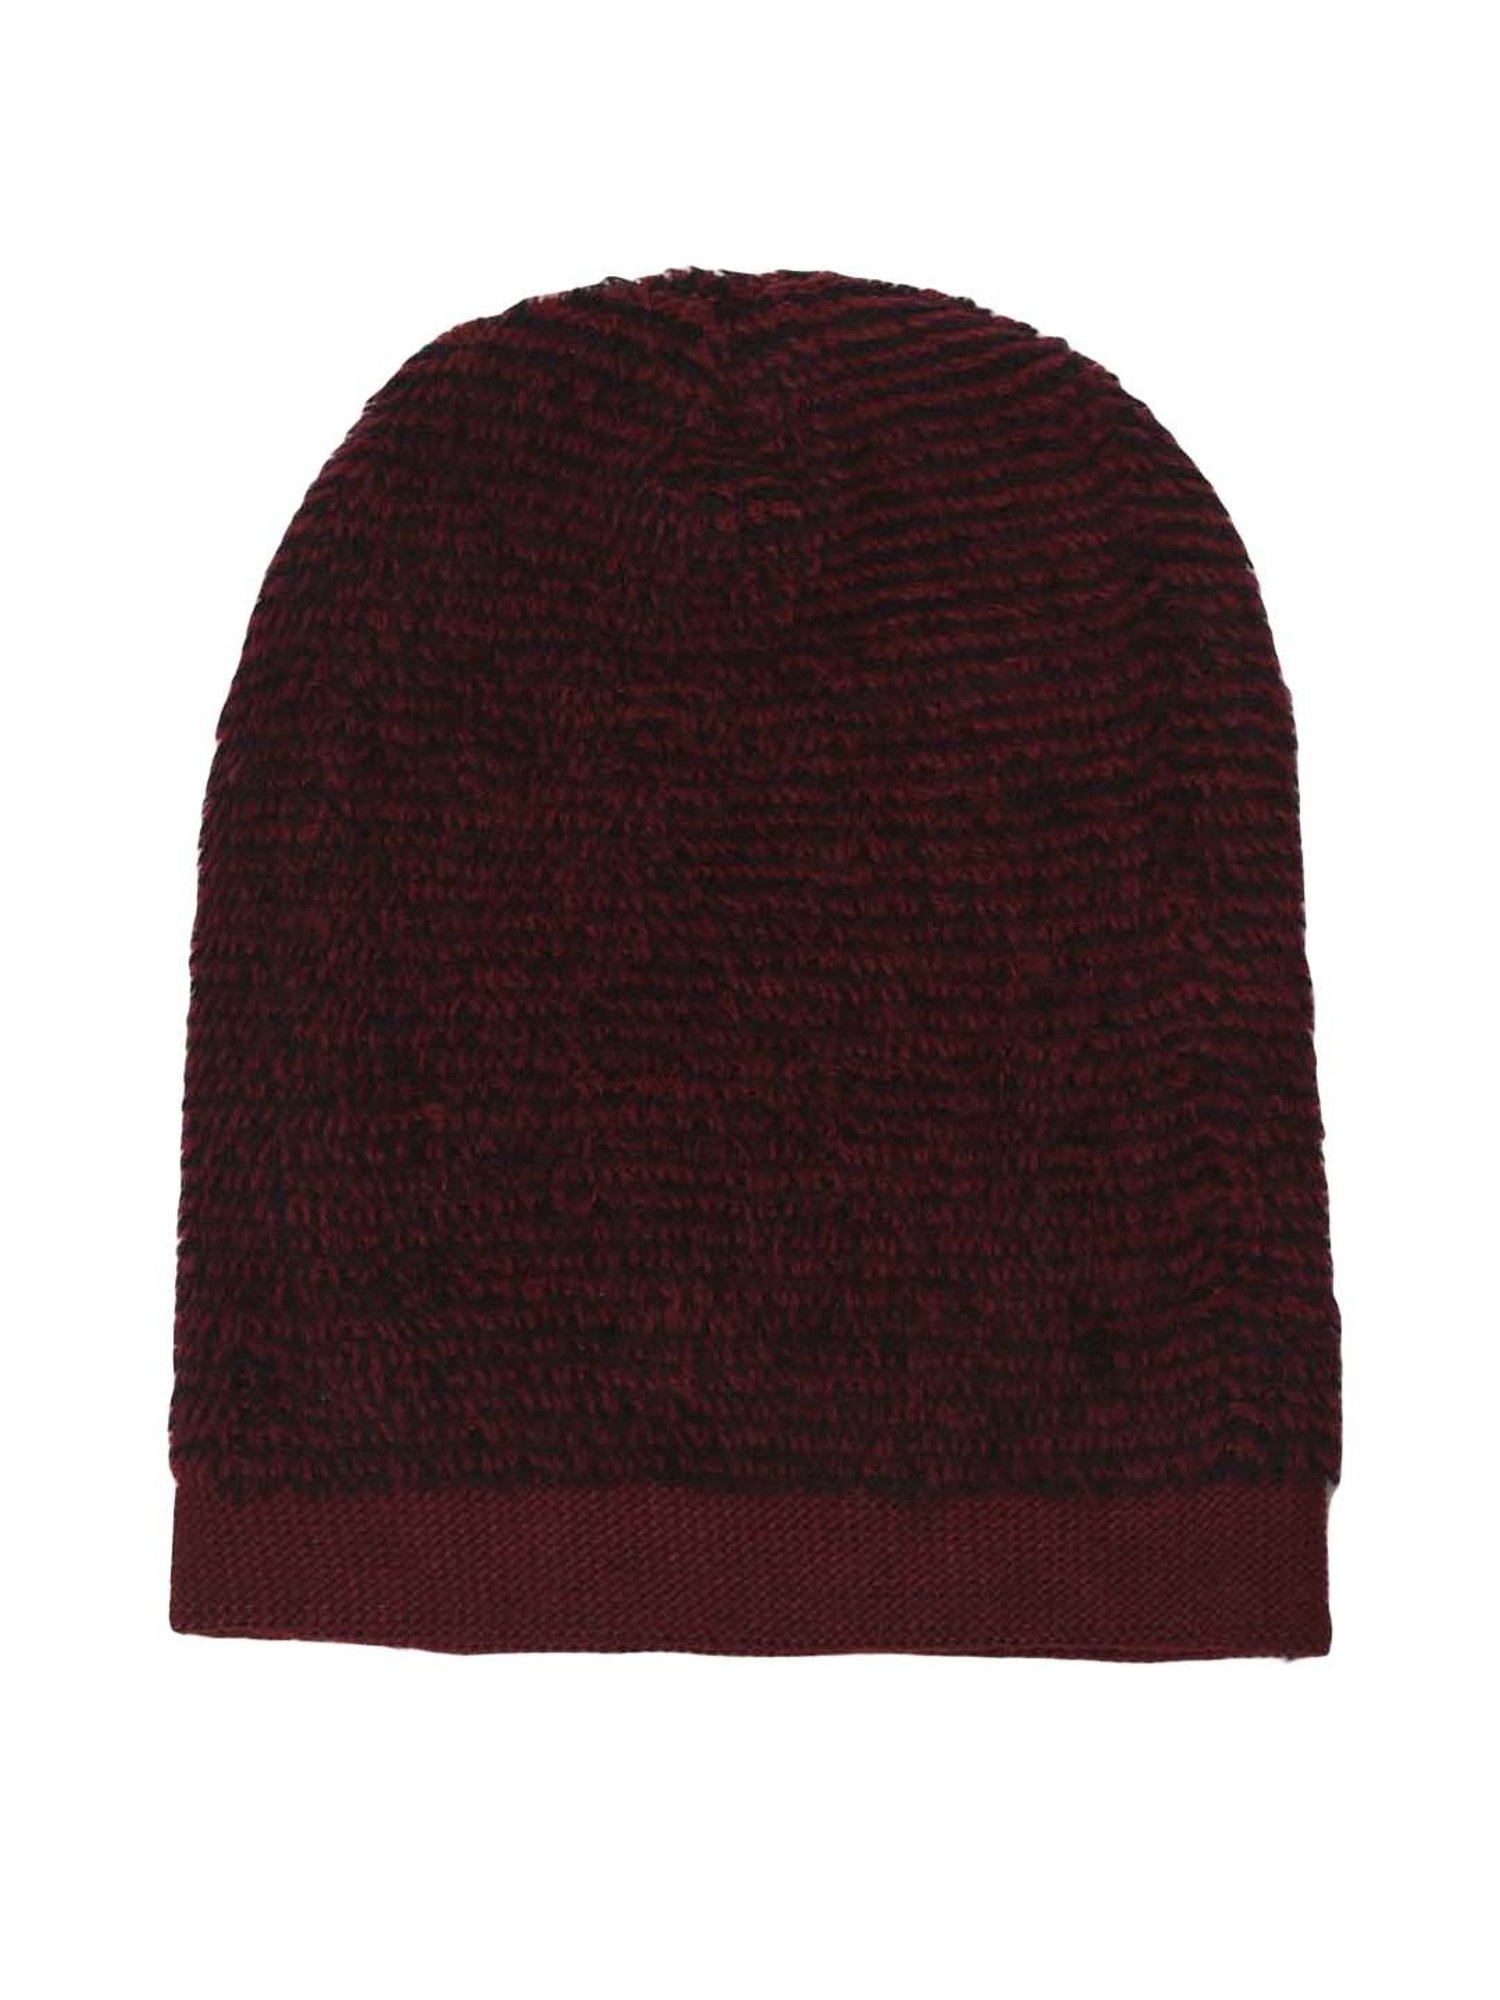 Adult Snowfall Toque - Burgundy Marl by North Standard Trading Post at  Maker House Co.